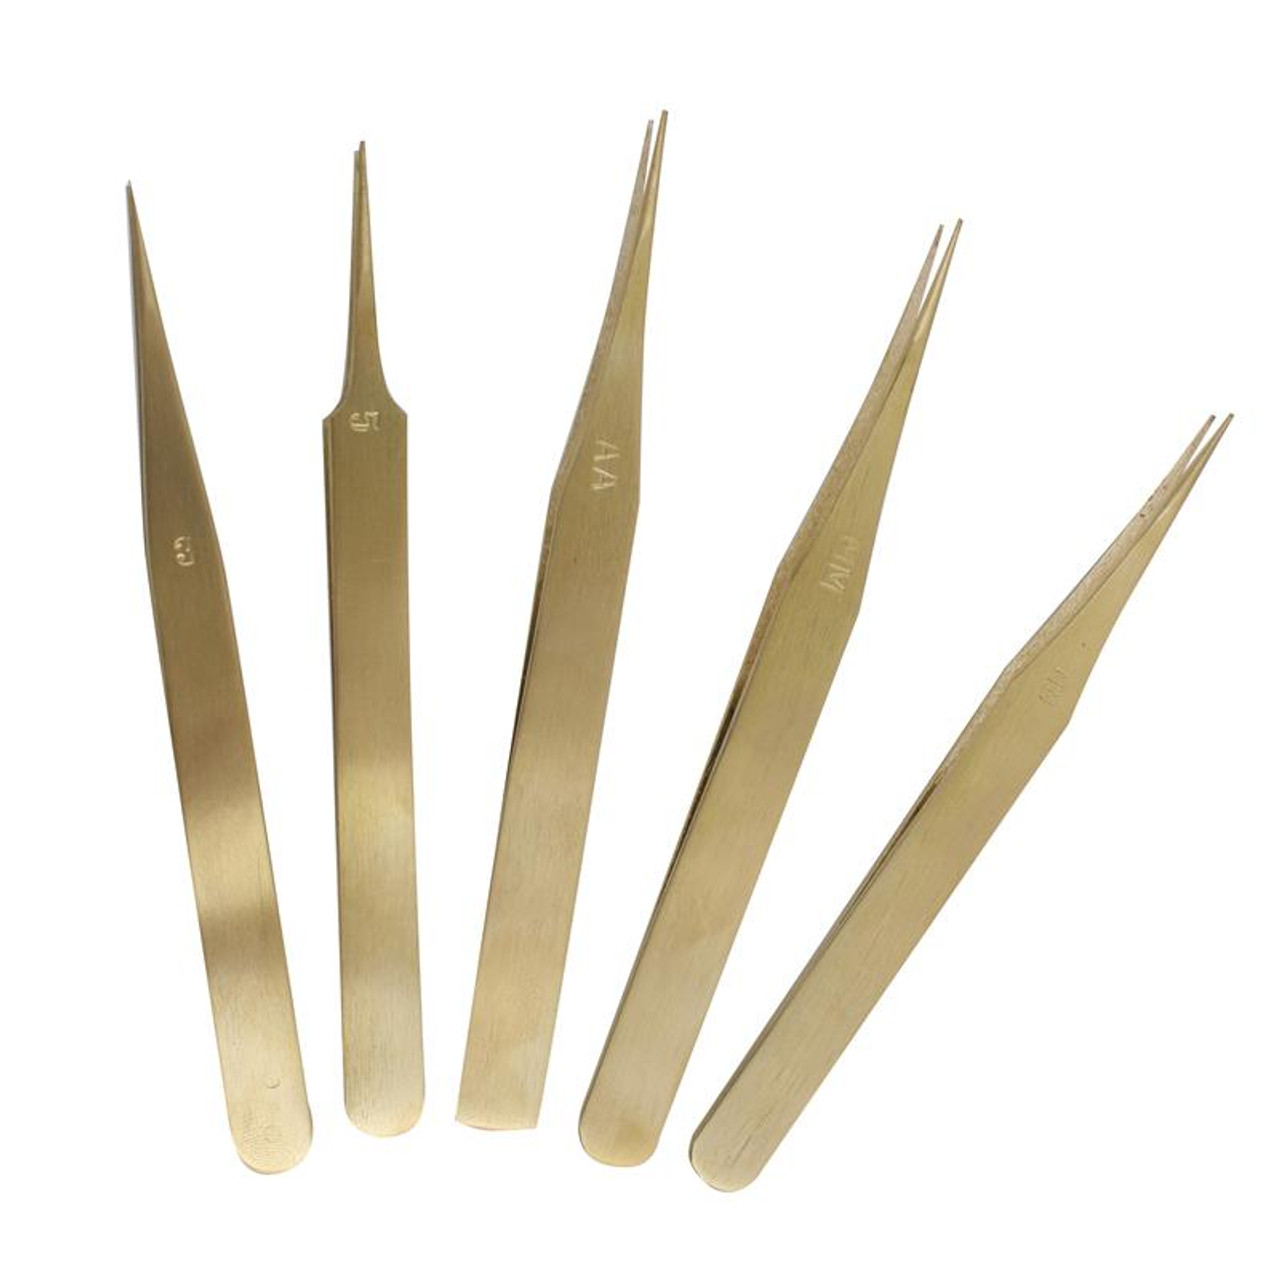 Newall Brass Tweezers Set of 5 Pieces Straight Tip 5 inch Long Very Soft Non Magnetic | Esslinger